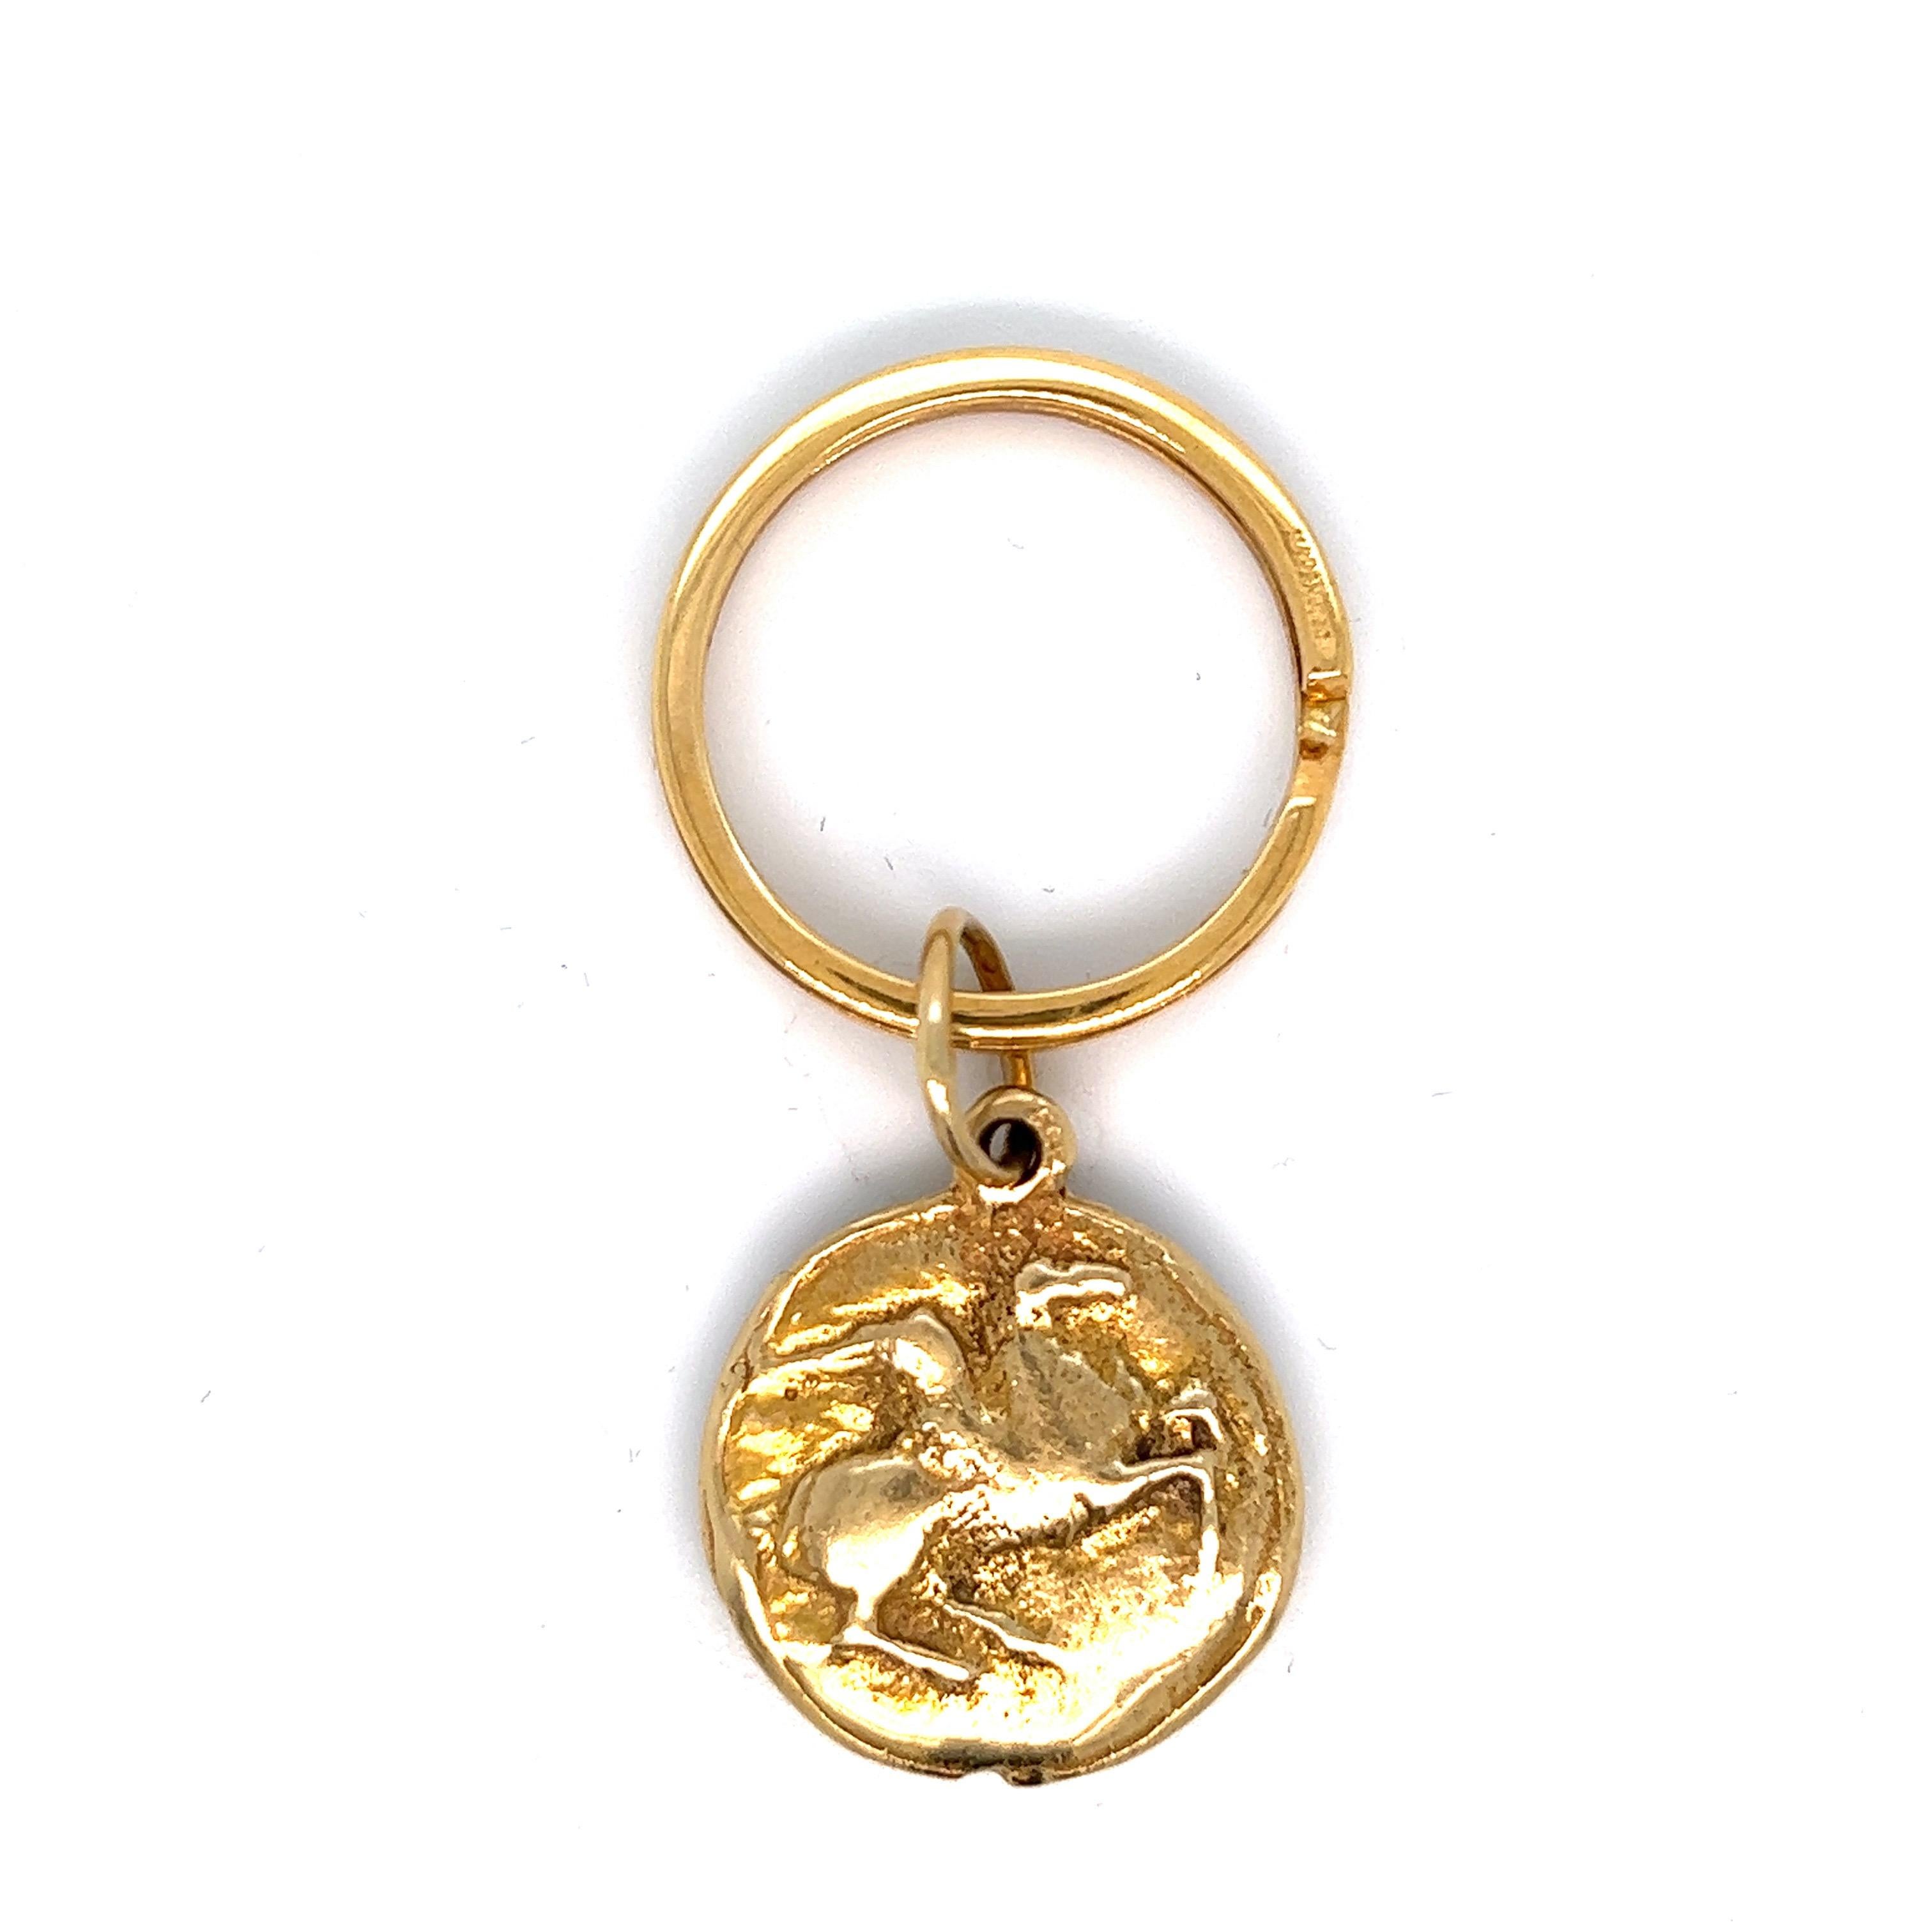 Gold coin key chain; marked 504 VI, 750

Attributed to Bvlgari's style, 18 karat yellow gold

Size: width 2.4 cm, length 2.8 cm
Total weight: 27.0 grams